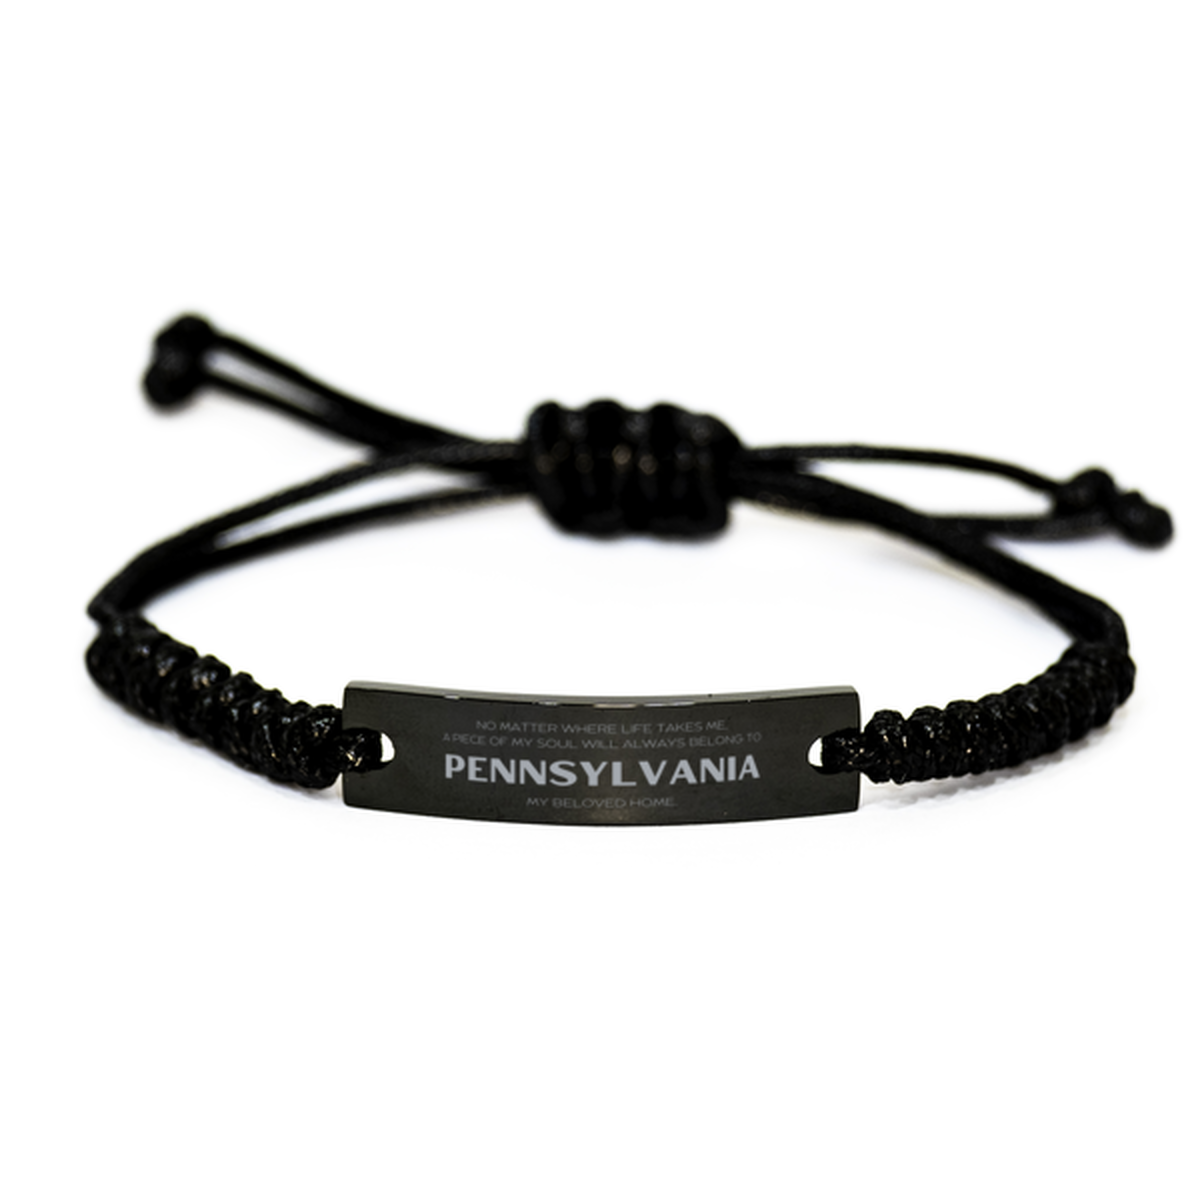 Love Pennsylvania State Gifts, My soul will always belong to Pennsylvania, Proud Black Rope Bracelet, Birthday Unique Gifts For Pennsylvania Men, Women, Friends